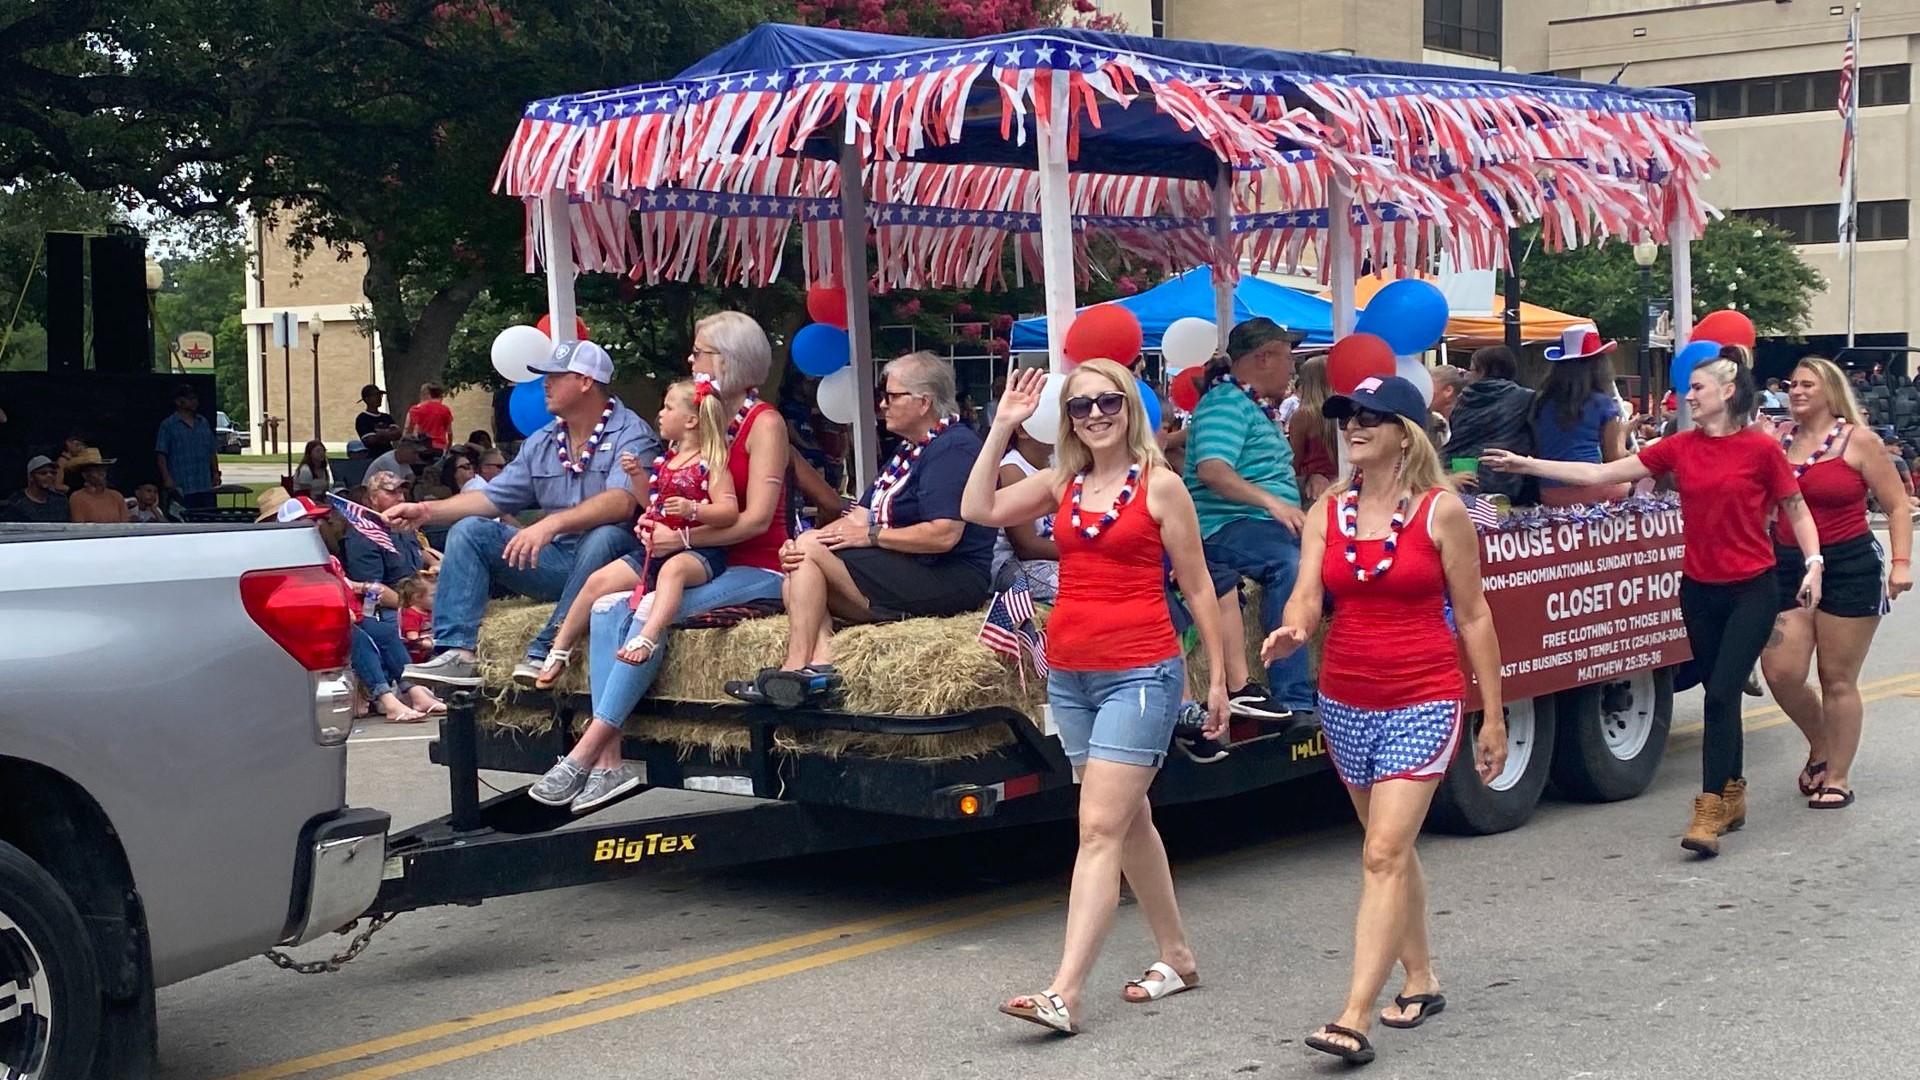 Check out the annual Independence Day parade in Belton broadcast live by 6 News.